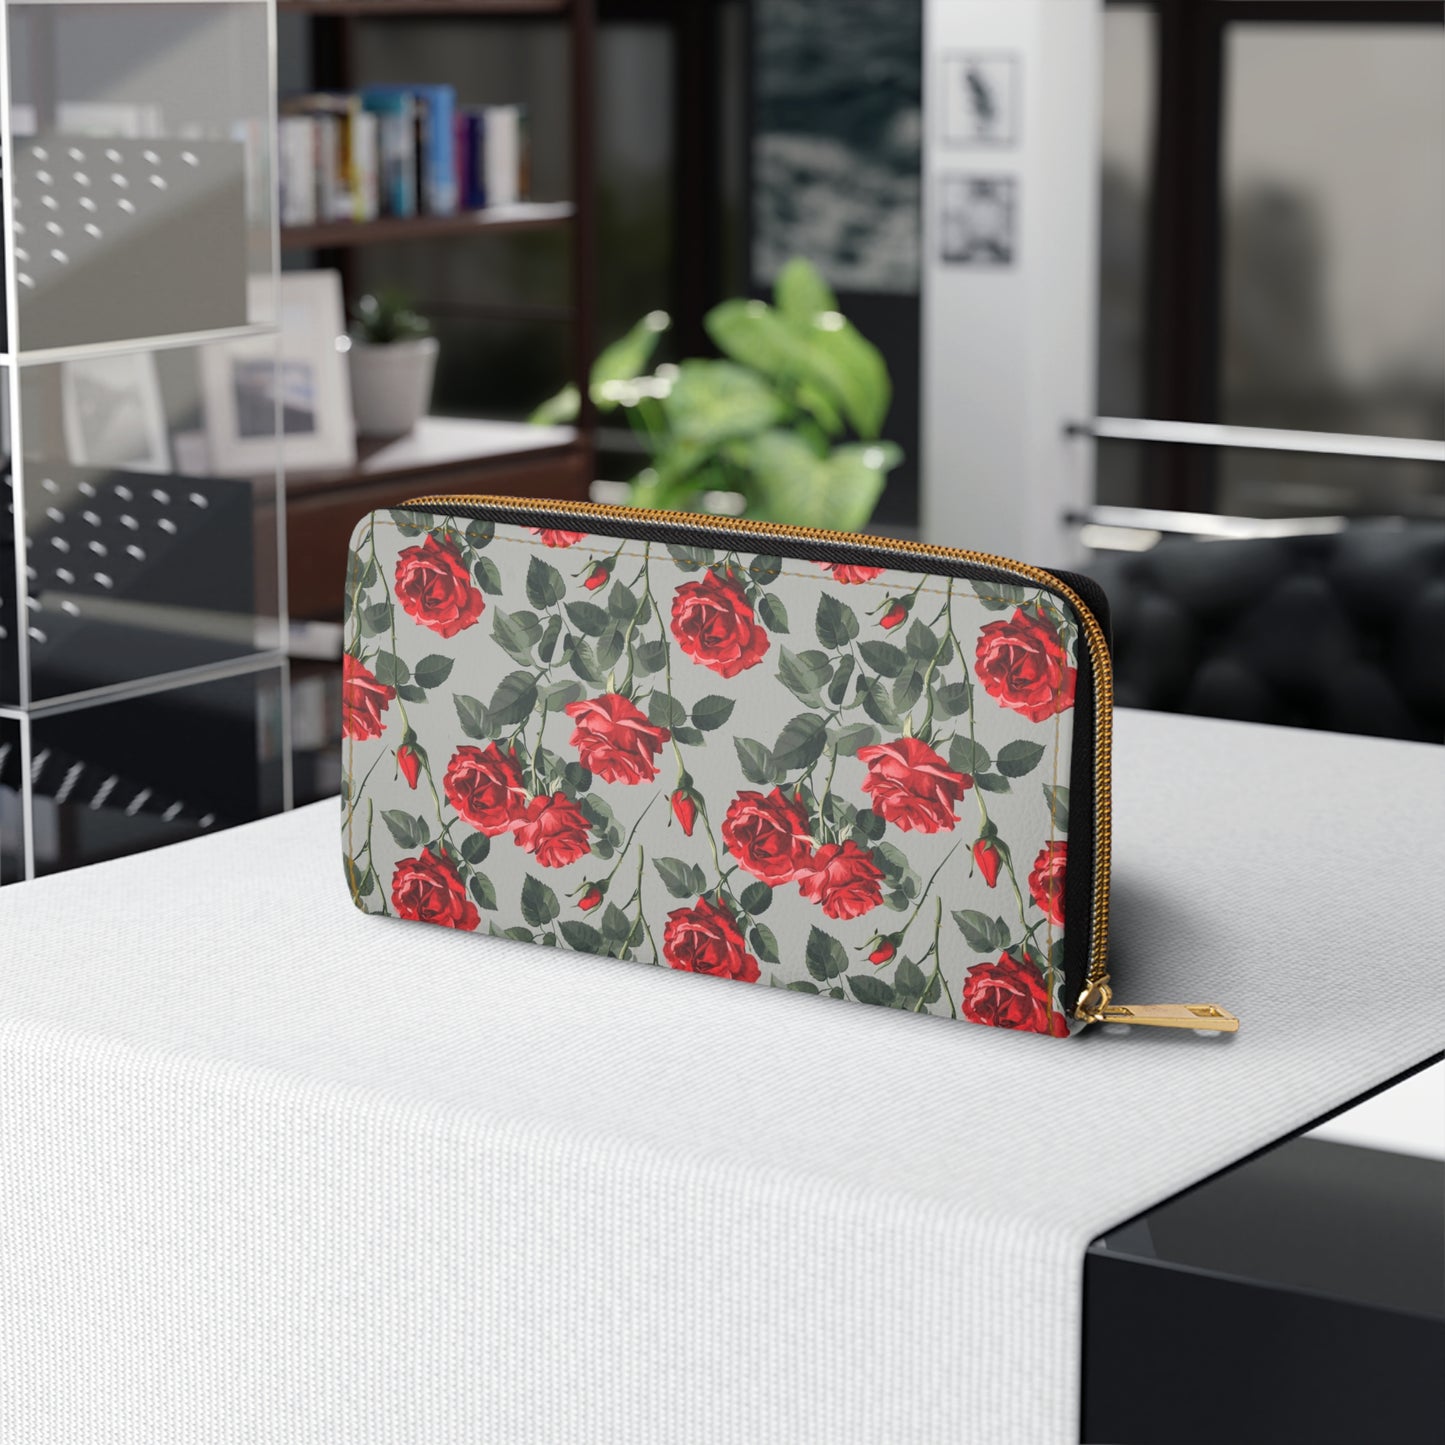 Roses Leather Wallet Women, Red Grey Floral Flowers Vegan Zipper Zip Around Coins Credit Cards Pocket Cash Ladies Pouch Slim Clutch Purse